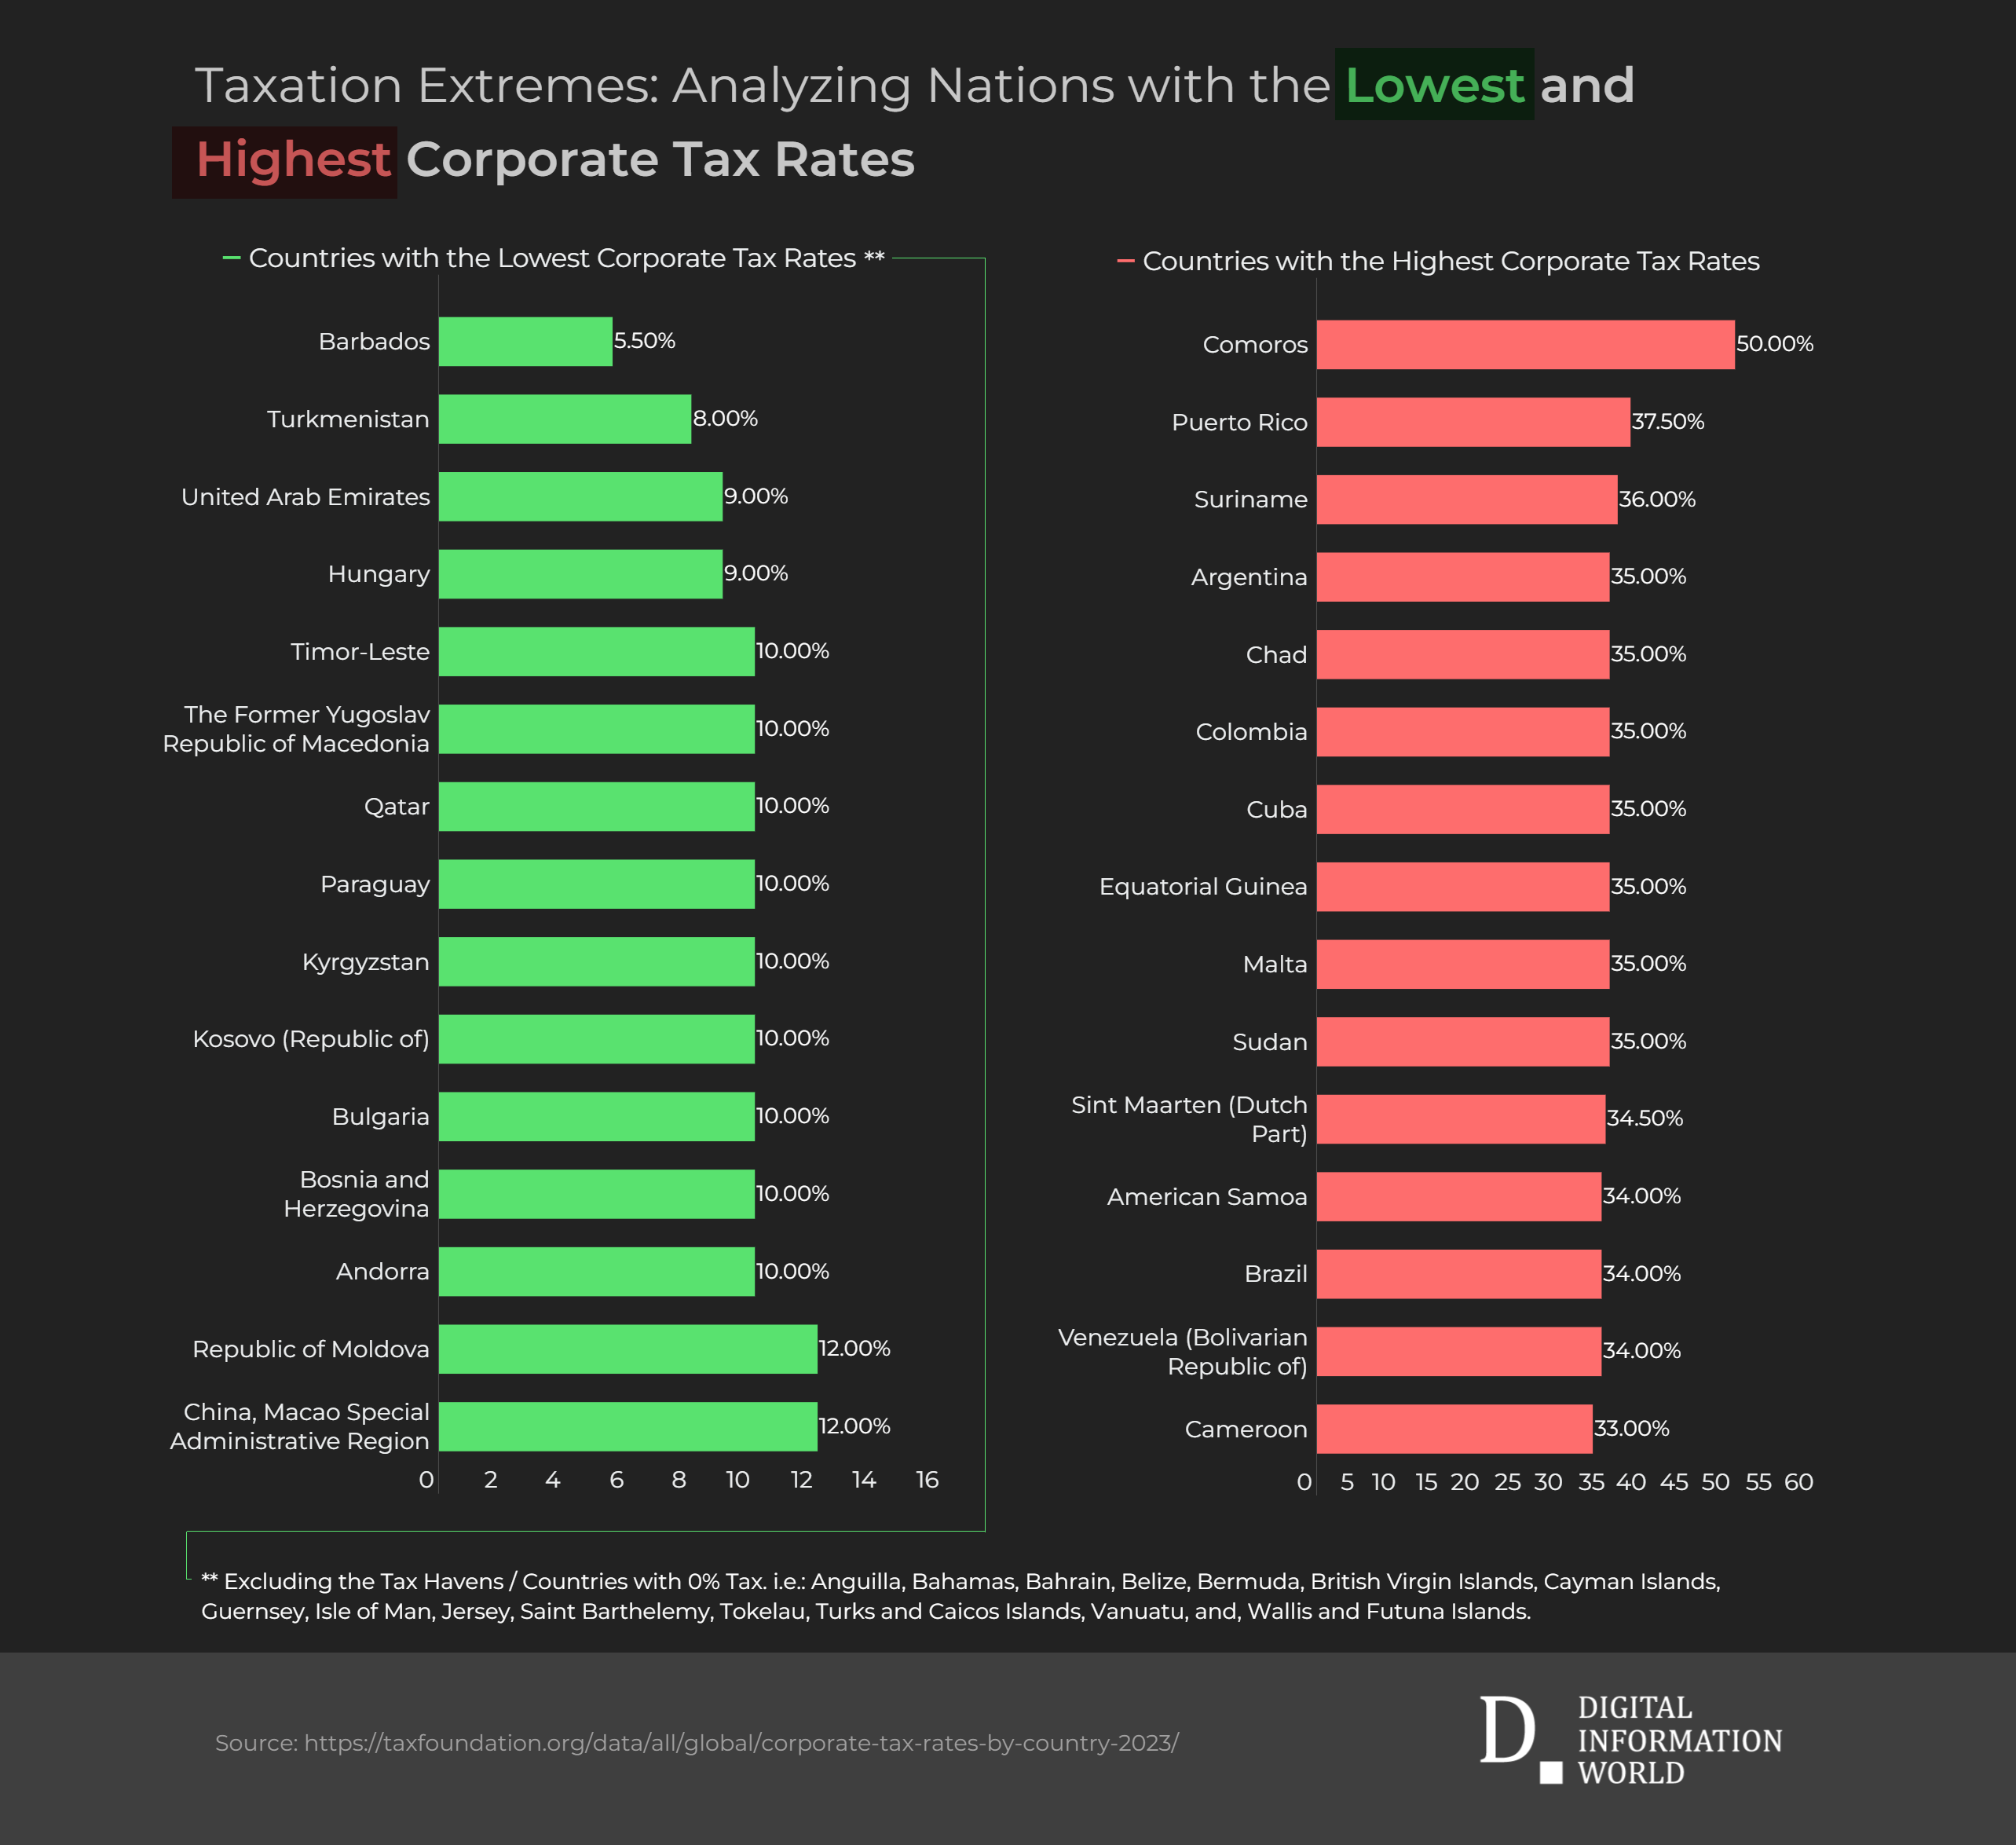 Exploring Nations with the Lowest Corporate Taxation Rates